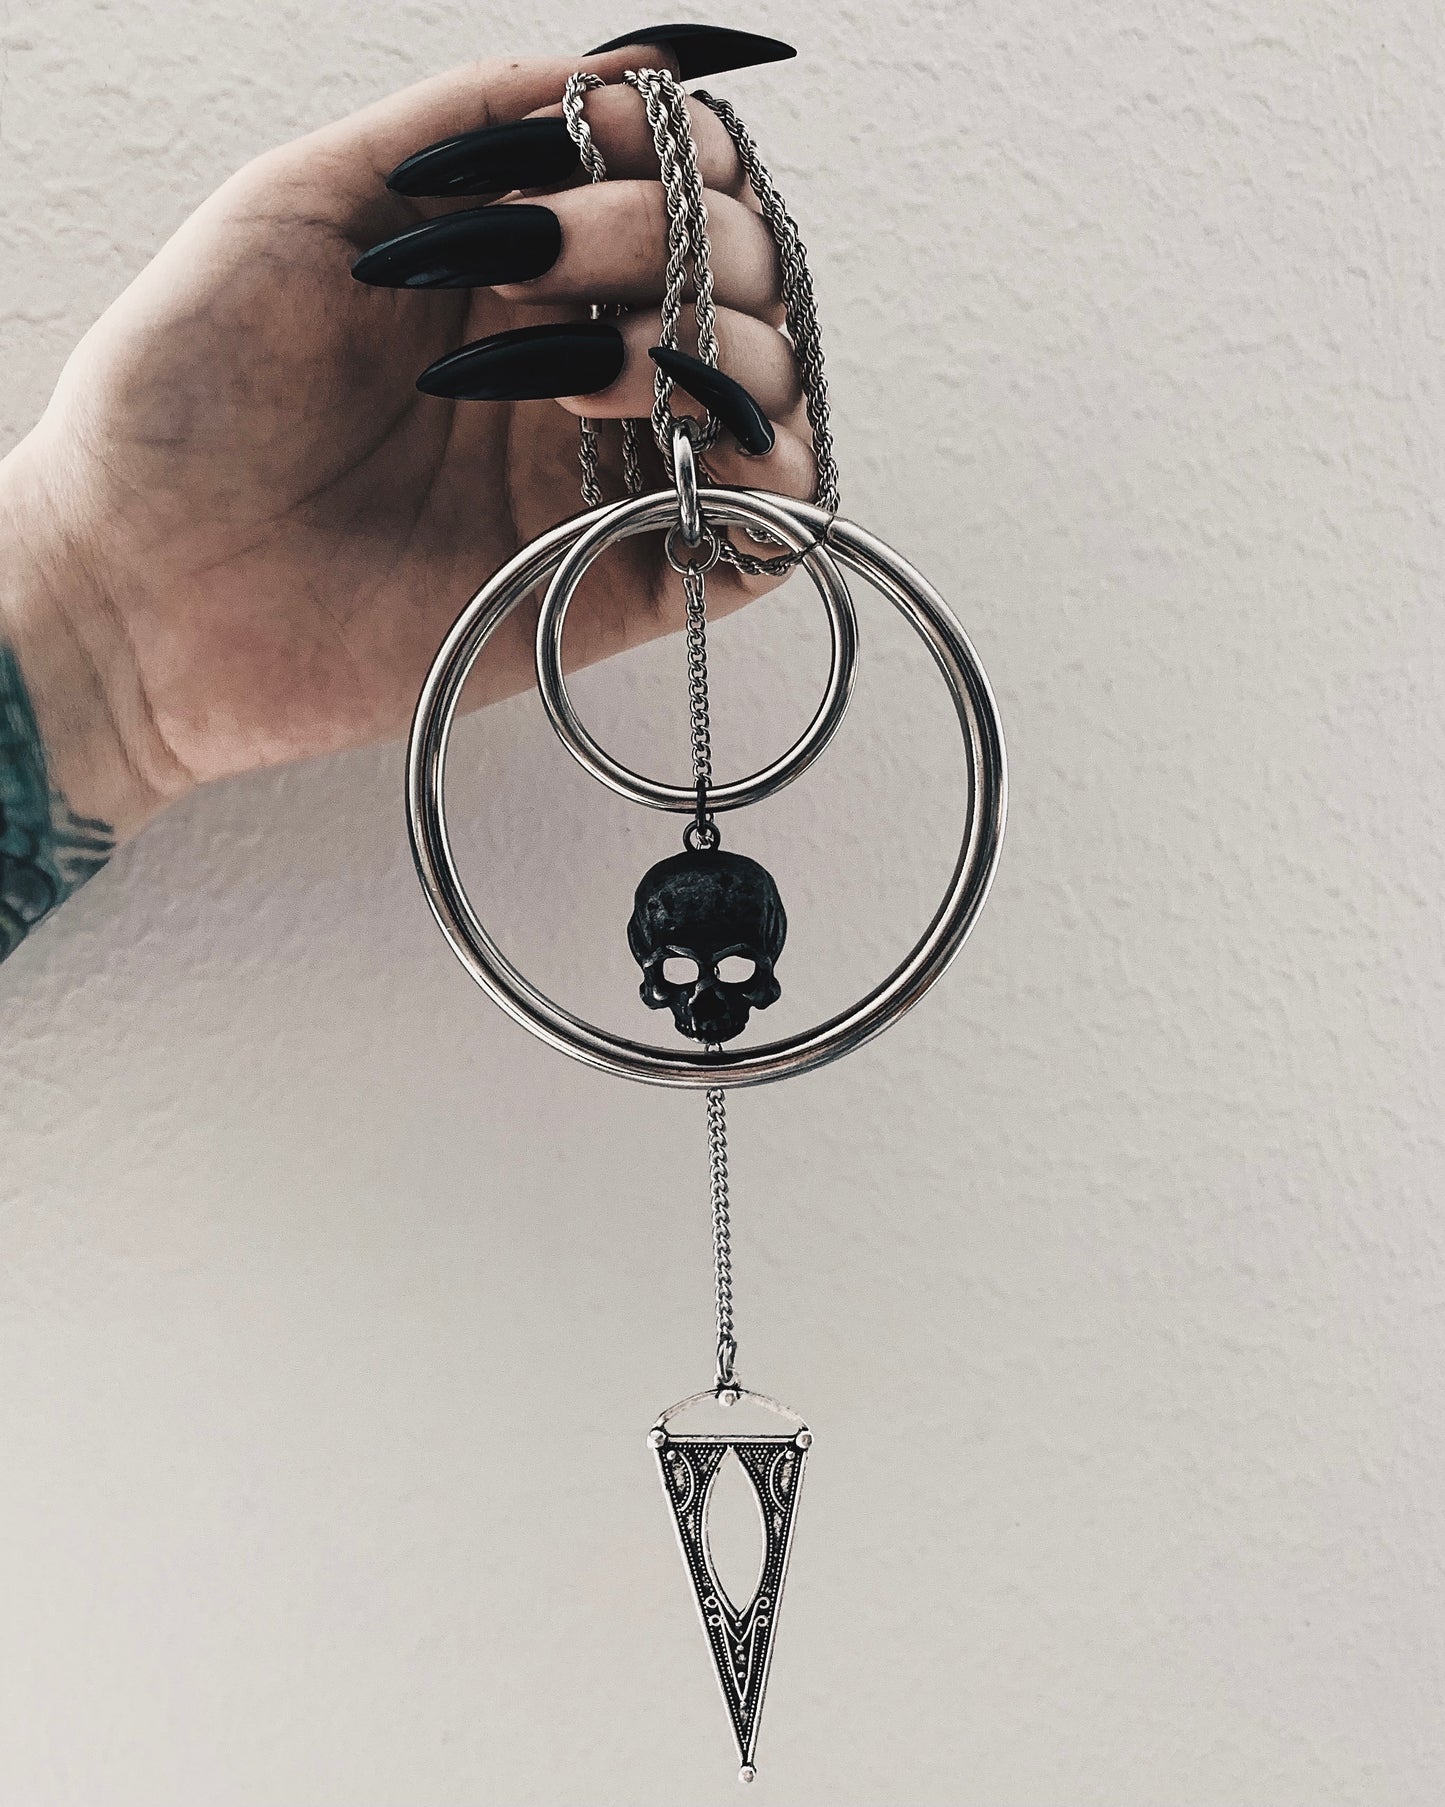 Decay necklace